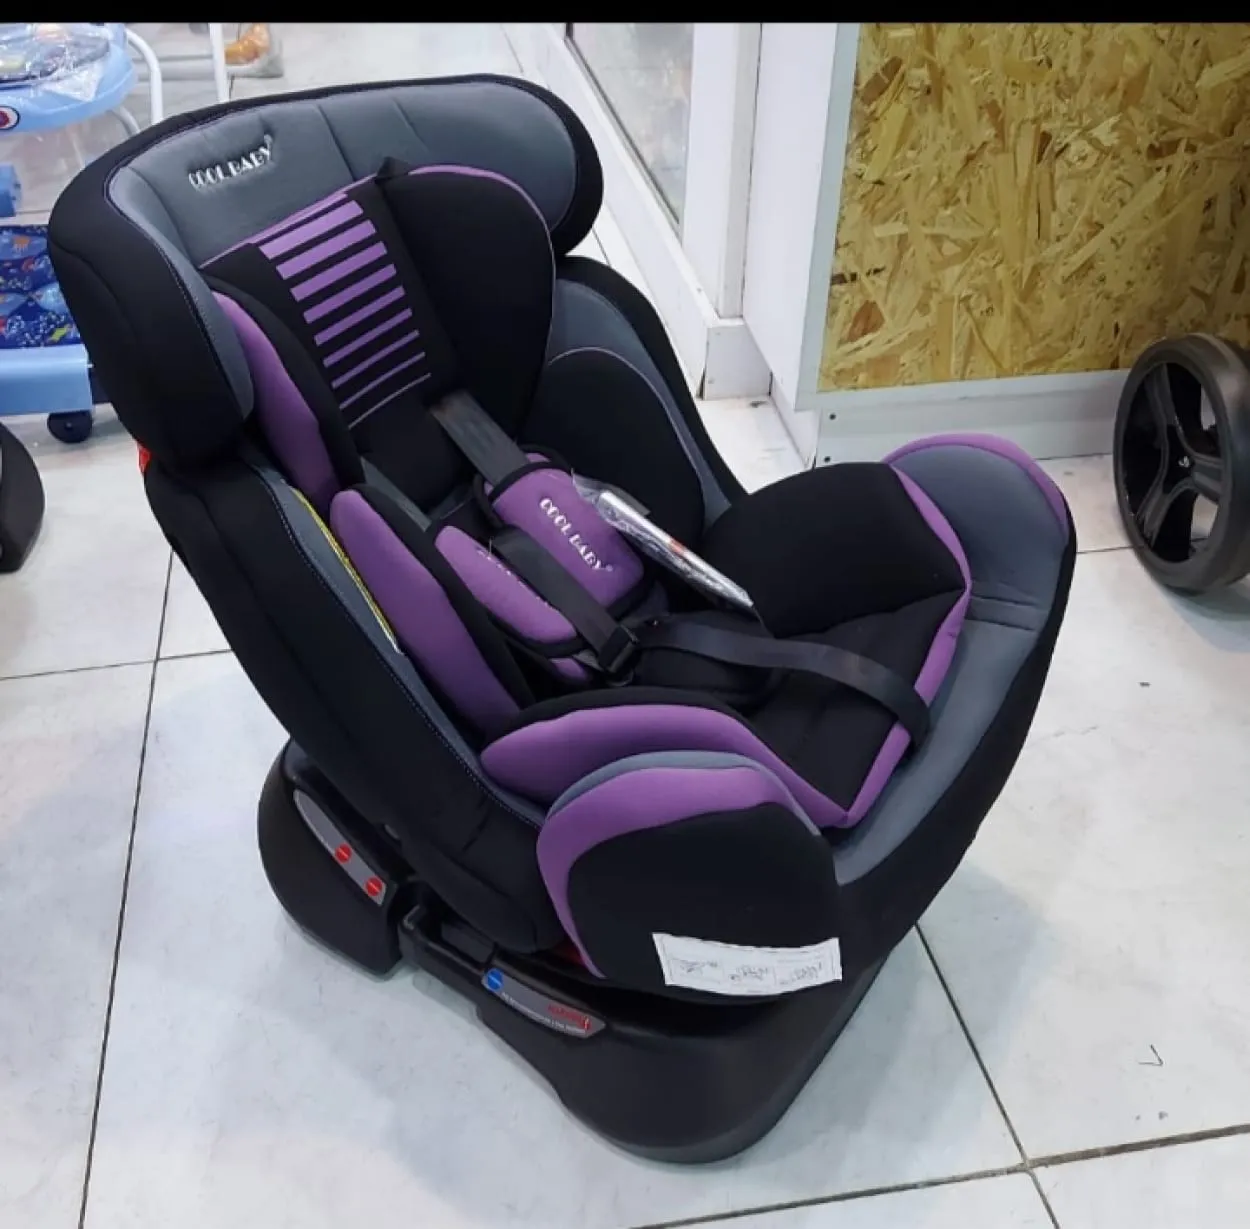 Auto Vehicle/Car Parts & Accessories Cars For Sale Language-Up To 12 years Cool baby car Seat Best price ever, High Quality! 1